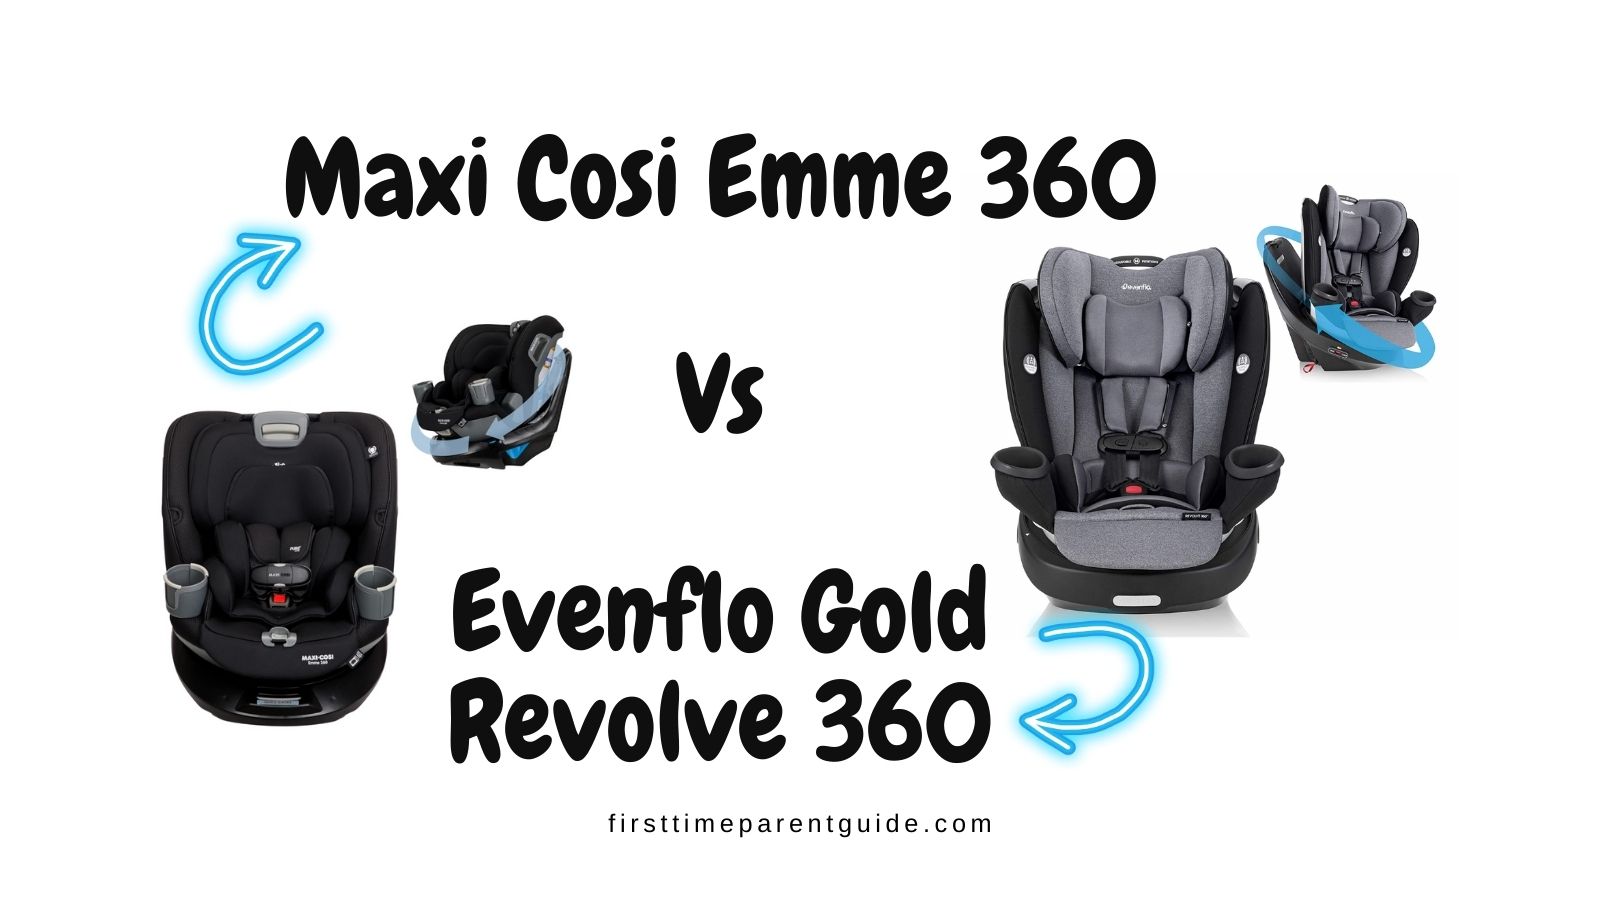 The Maxi Cosi Emme 360 or